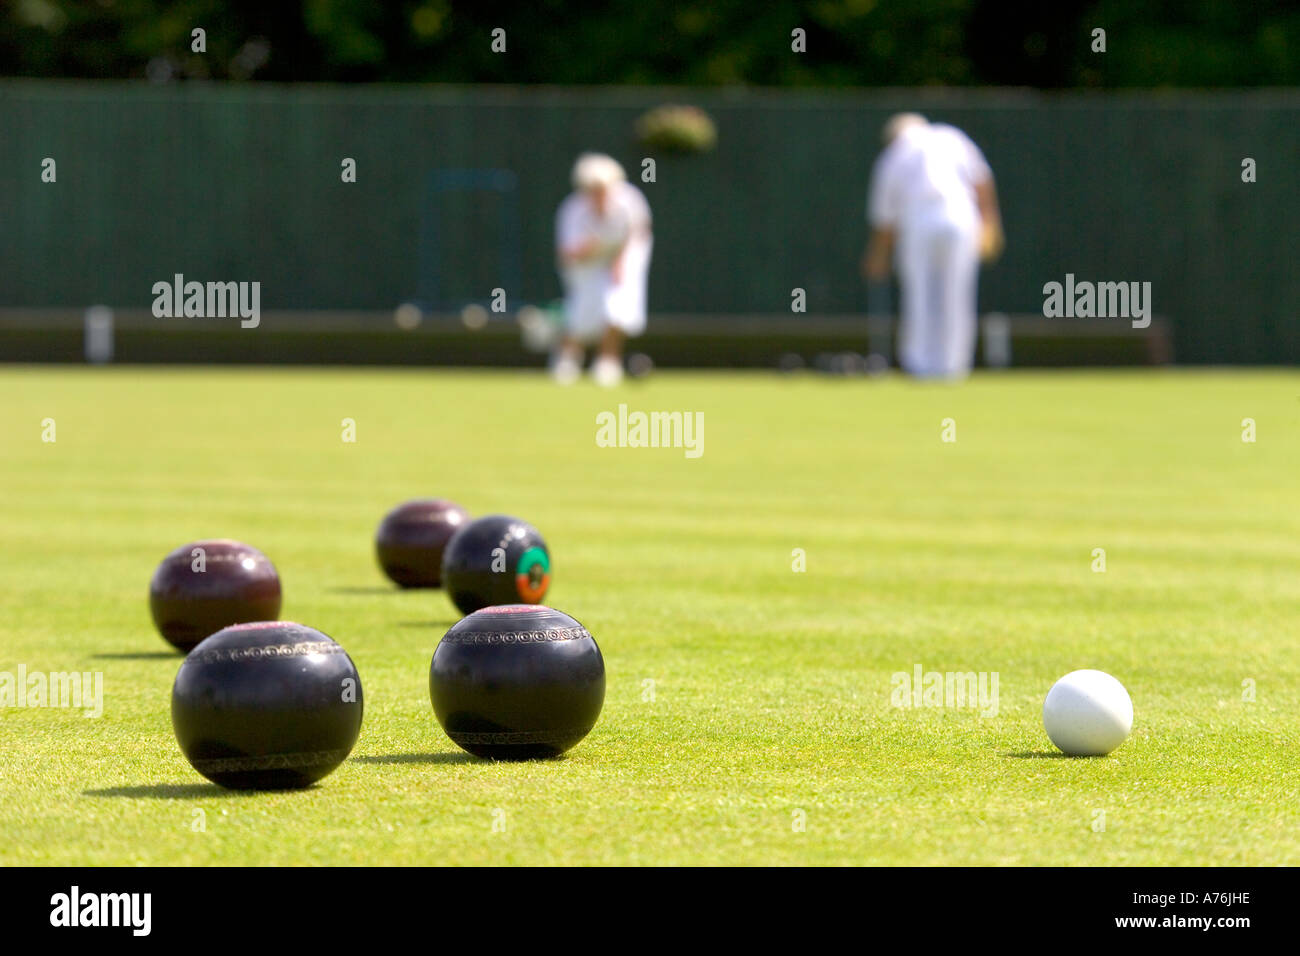 Close up of bowls and jack during a game with blurred team members in the background. Stock Photo